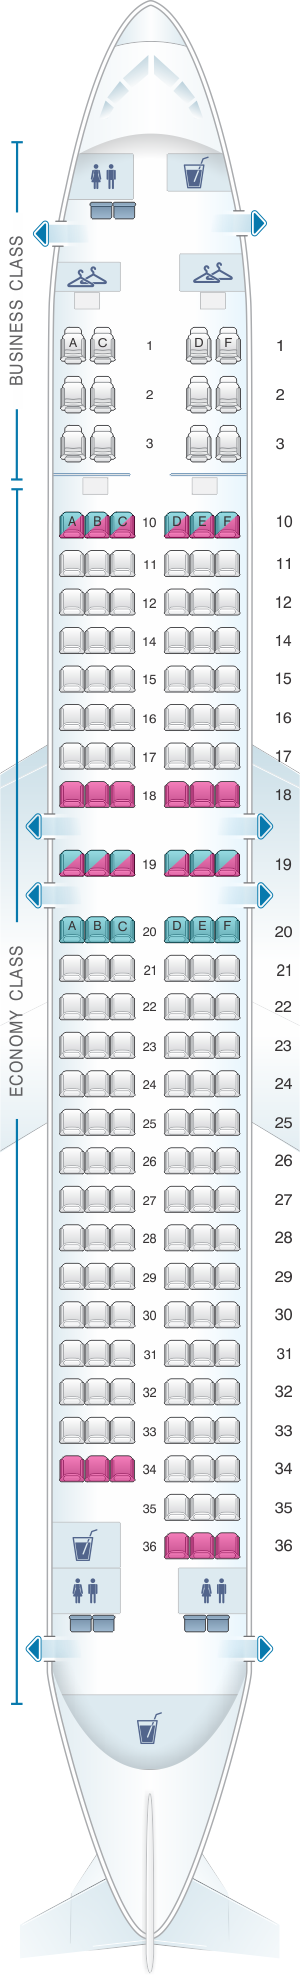 Seat map for Oman Air Boeing B737 800 V2